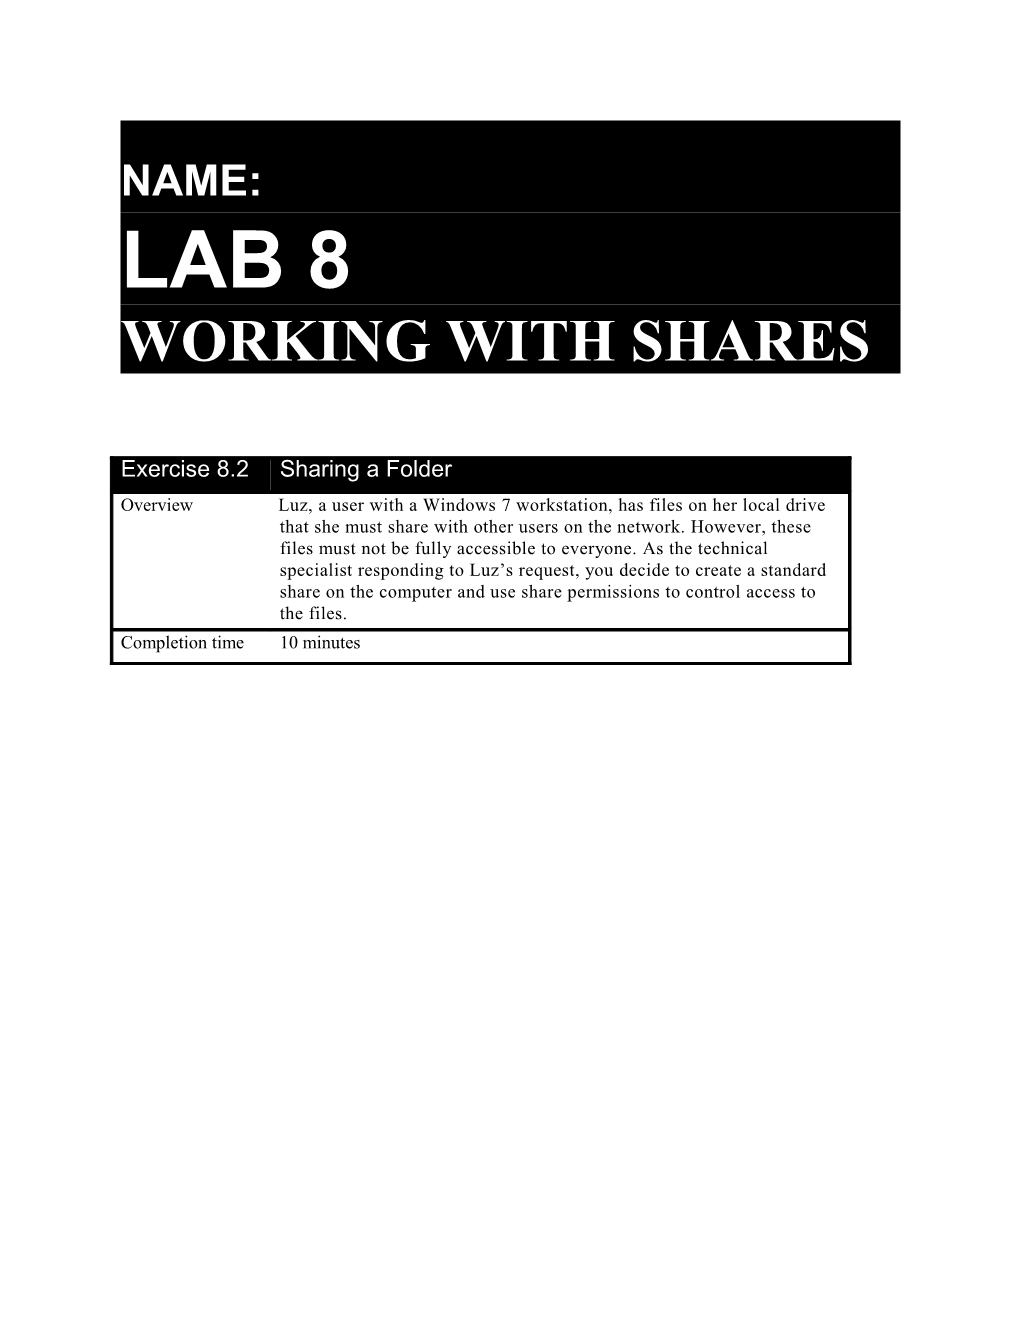 Working with Shares